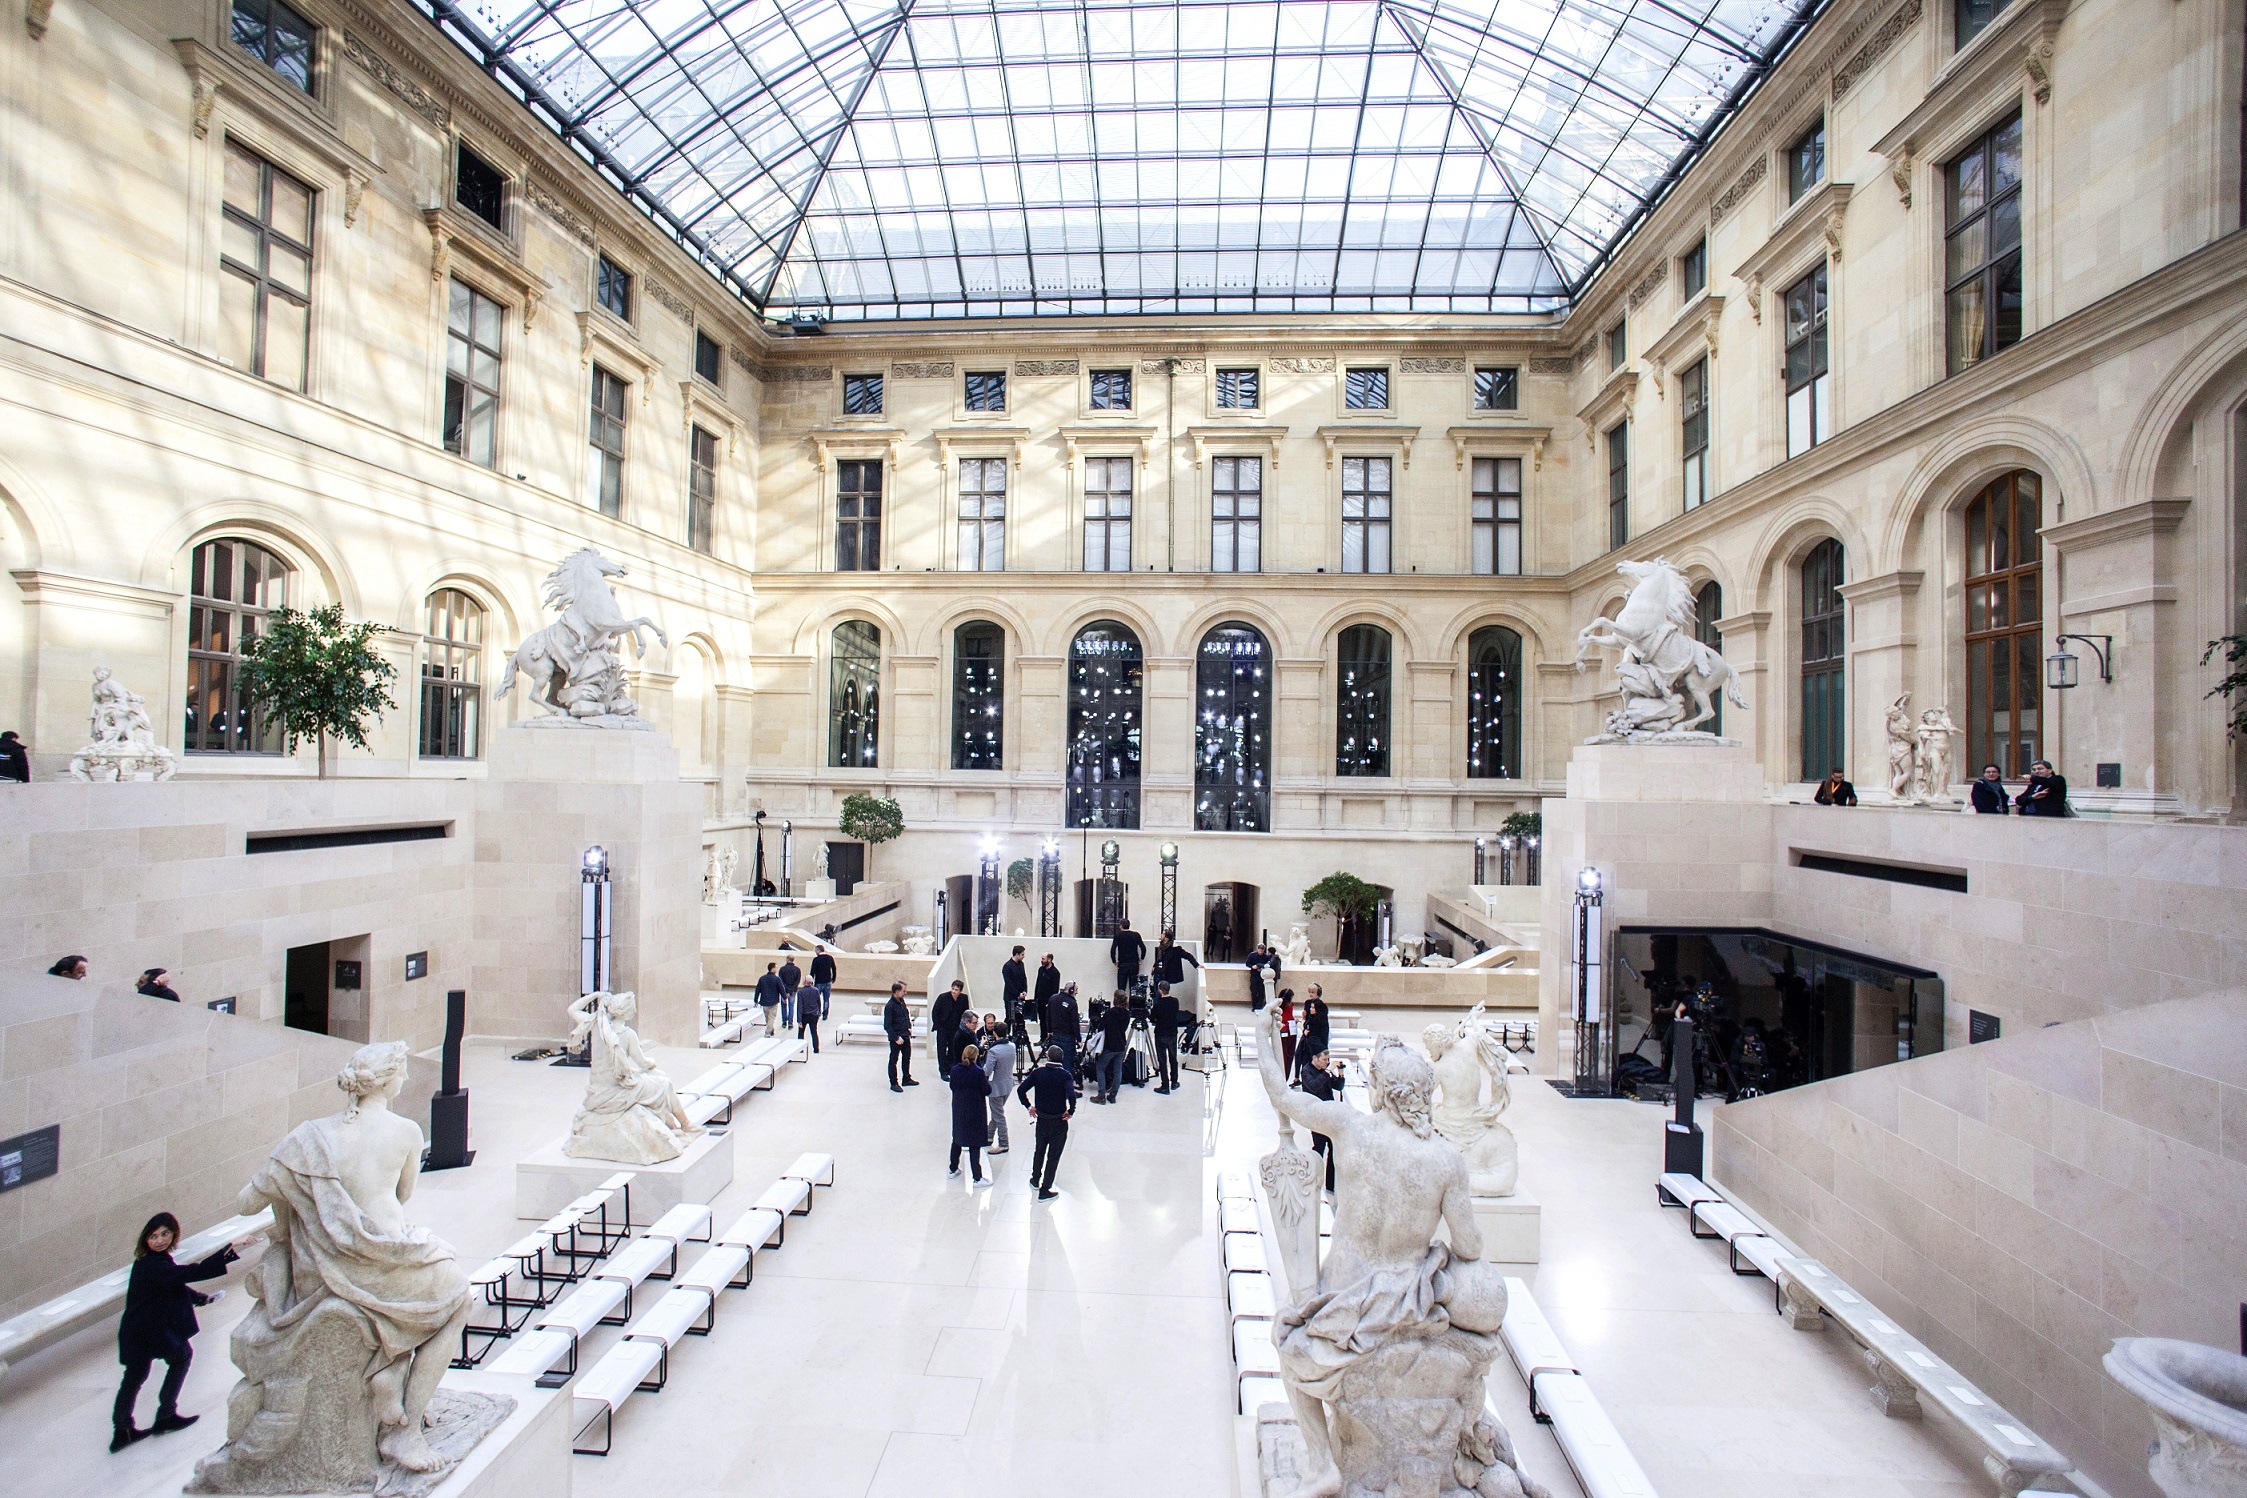 Back In Time: Louis Vuitton's Architectural Exhibit